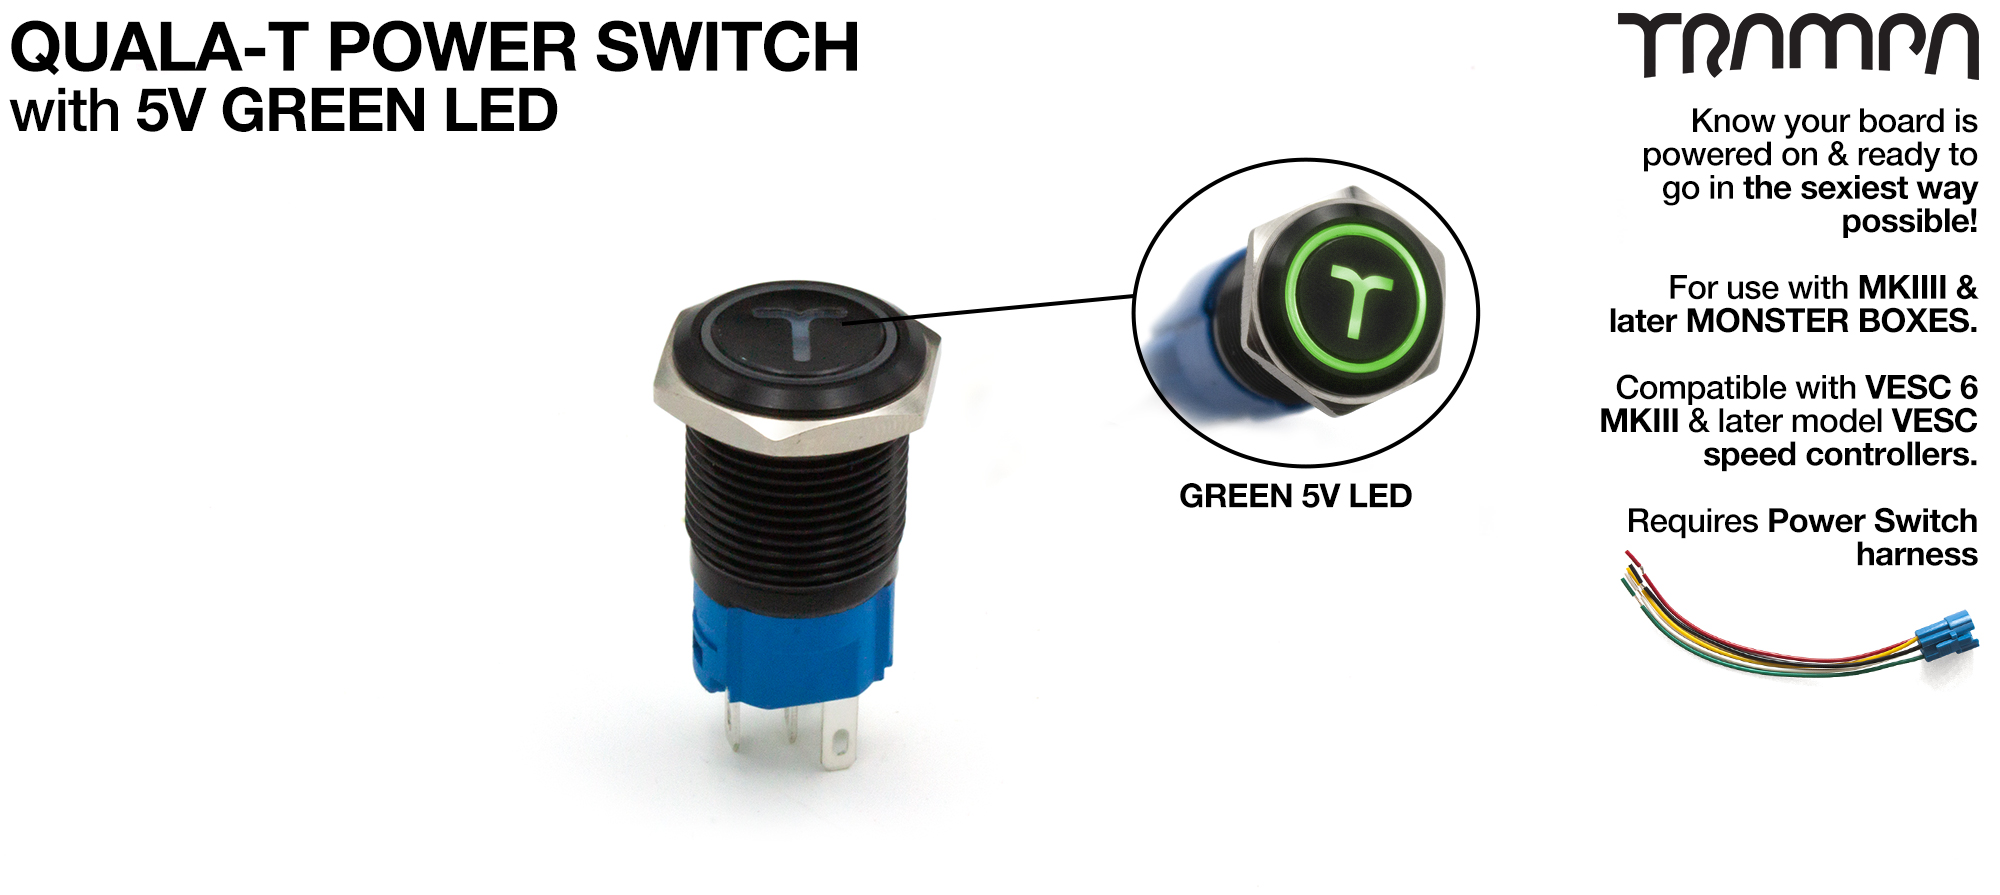 TRAMPA Switch with 5V GREEN LED QUALA-T & 16mm Stainless Steel Fixing Nut 